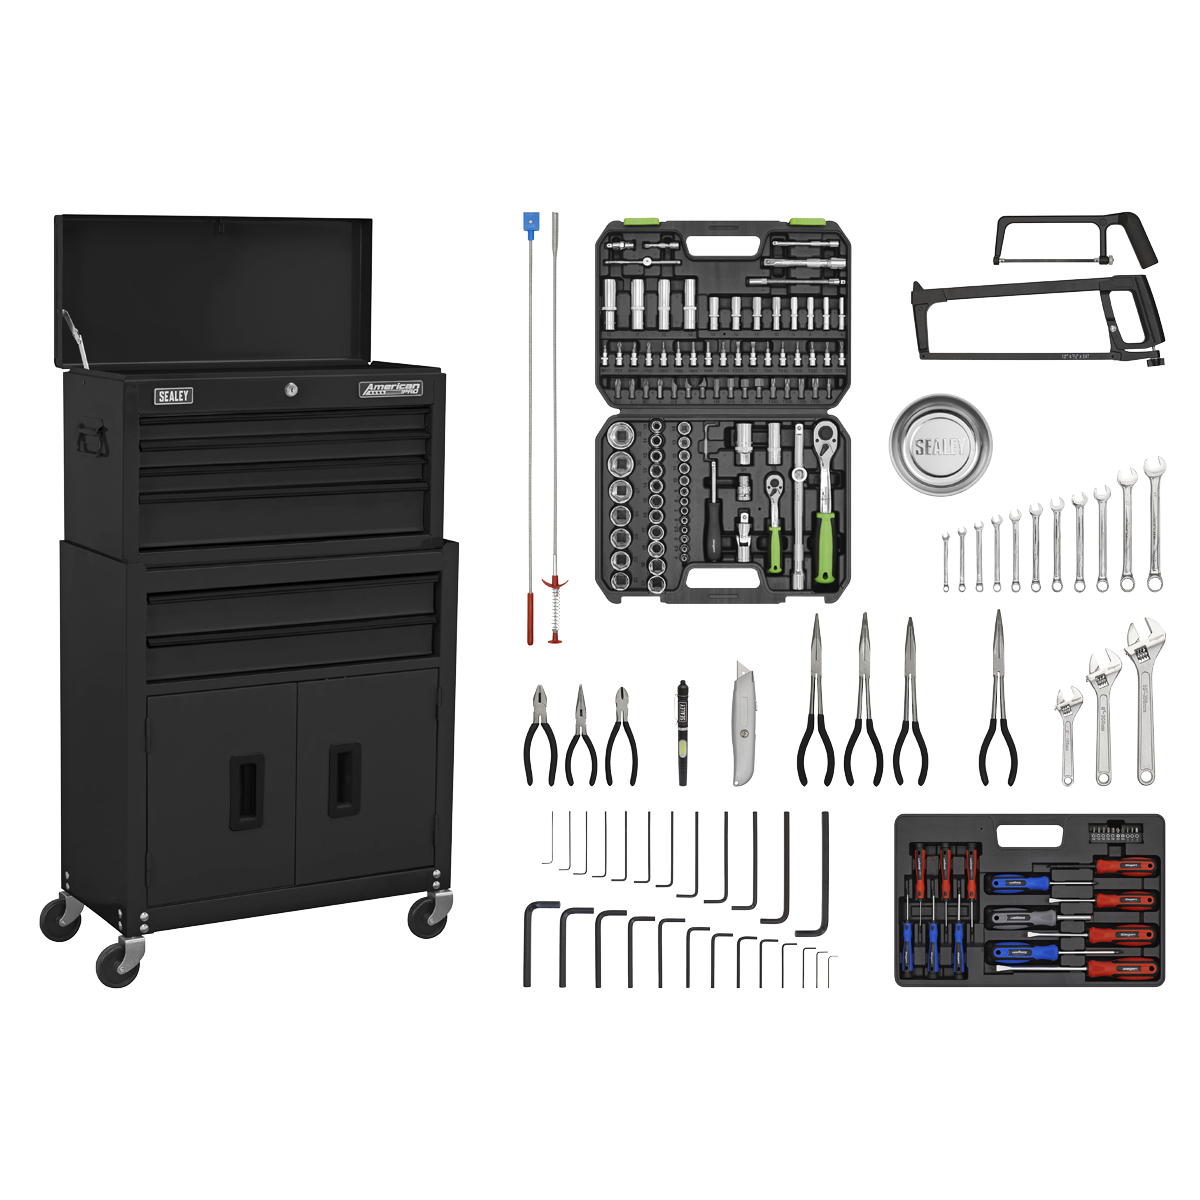 Topchest & Rollcab Combination 6 Drawer with Ball-Bearing Slides - Black & 170pc Tool Kit - AP22BKCOMBO - Farming Parts